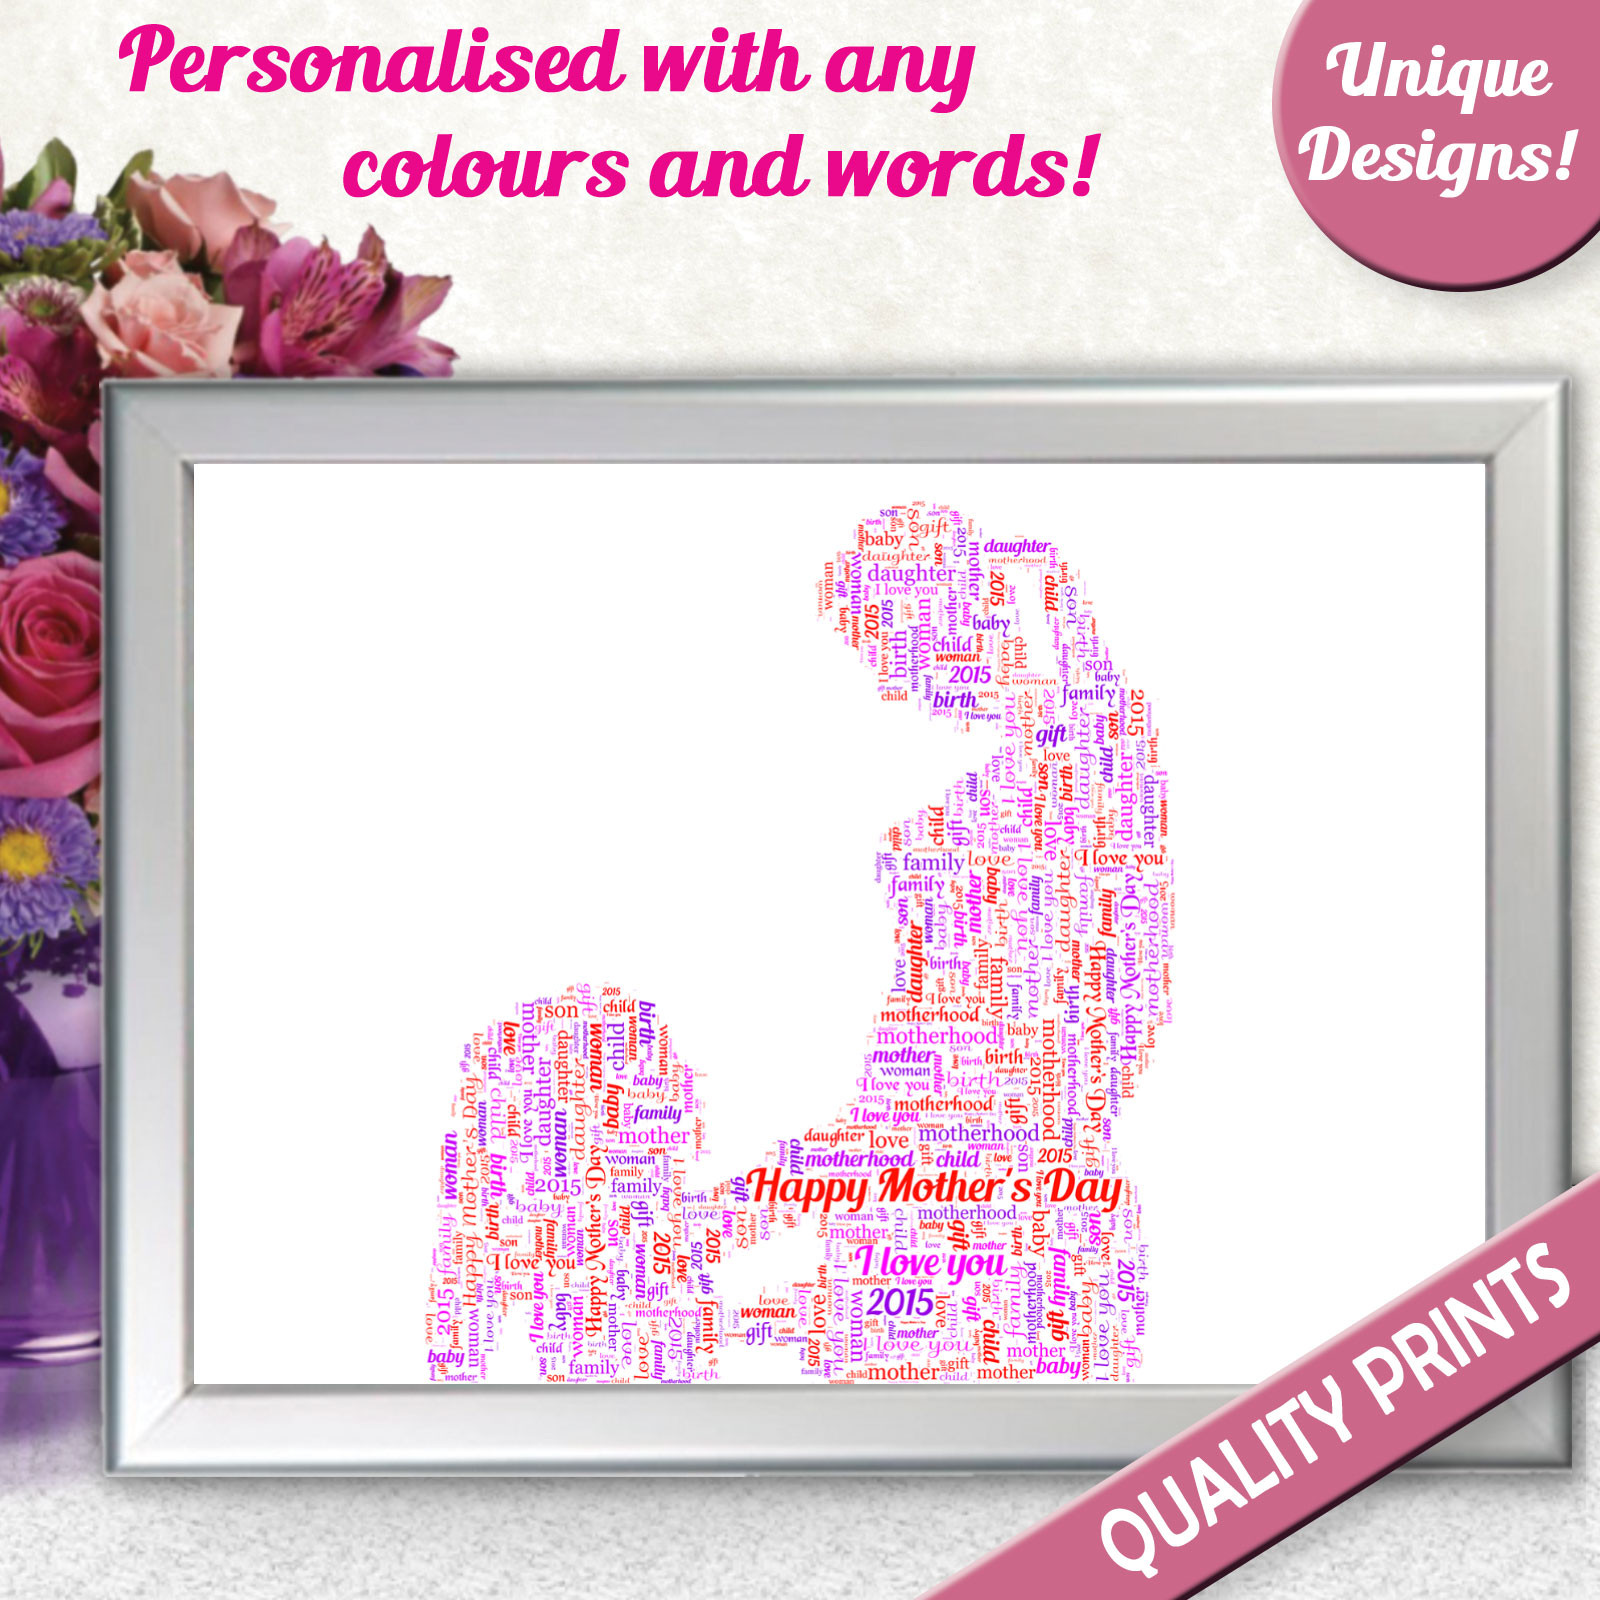 Gift Ideas For Mother'S Birthday
 PERSONALISED WORD ART MOTHER AND DAUGHTER ON MOTHER S DAY